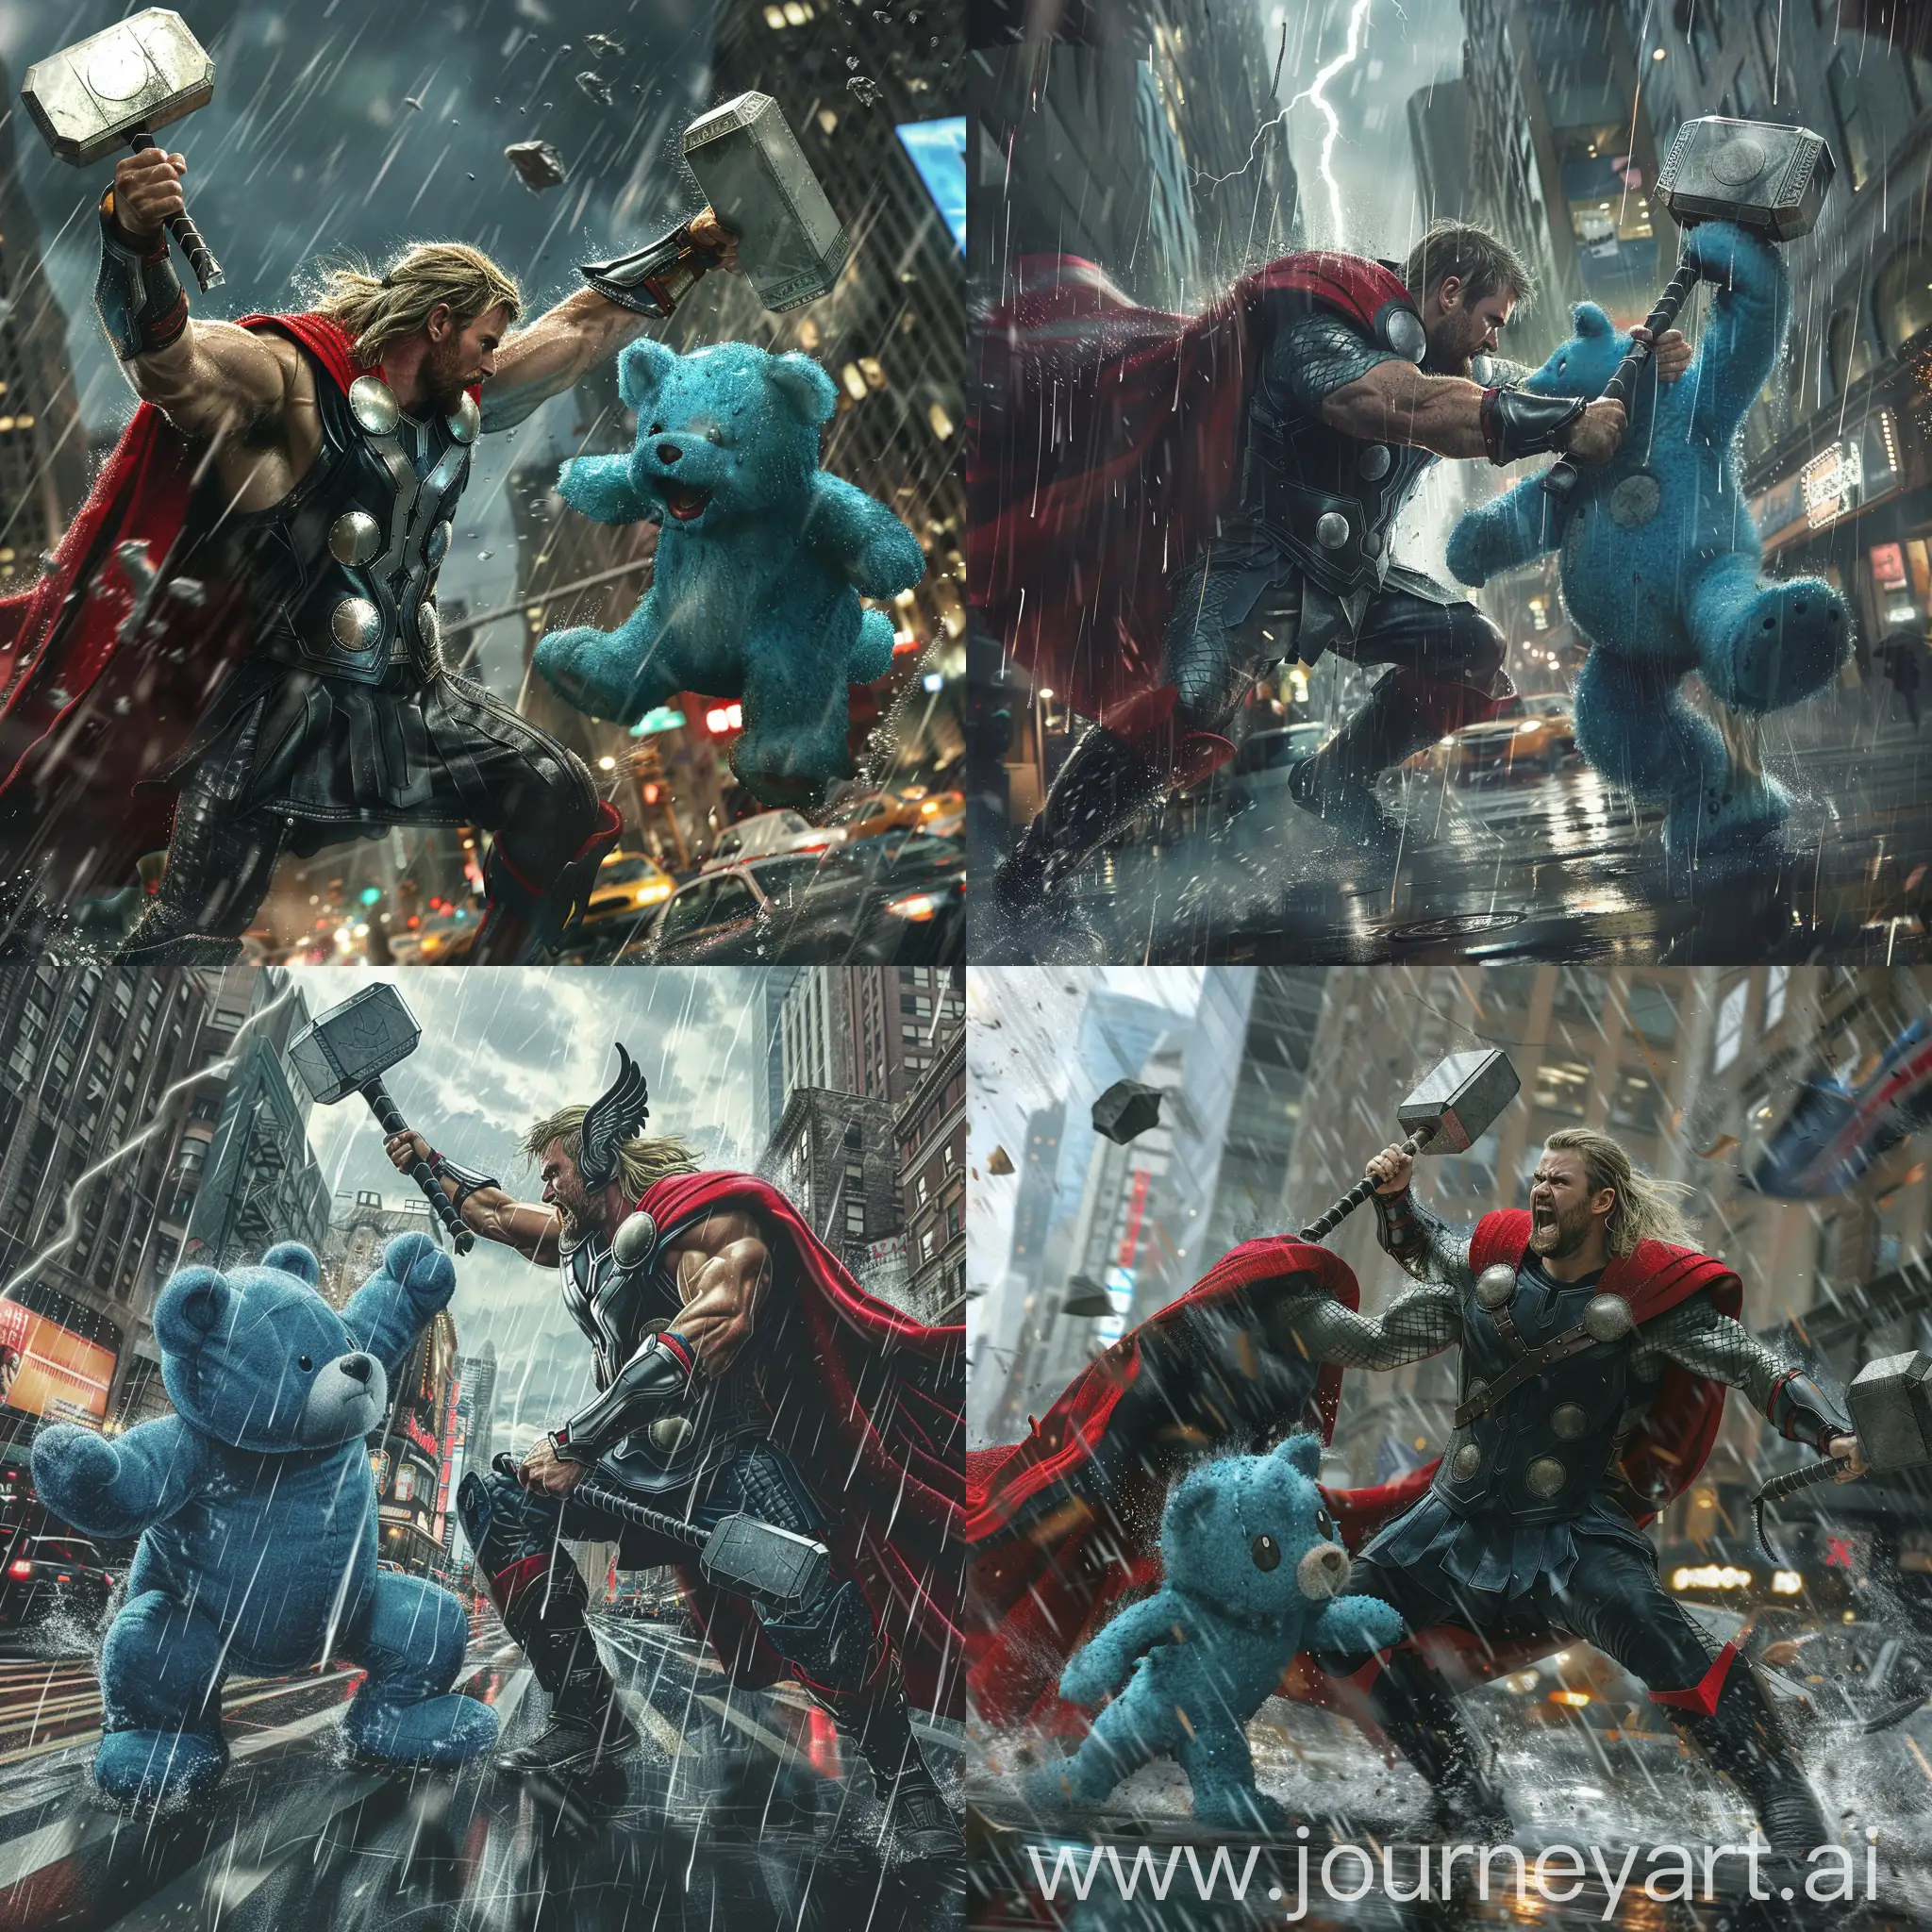 Epic-Battle-Thor-vs-Blue-Cuddly-Monster-in-Rainy-Cityscape